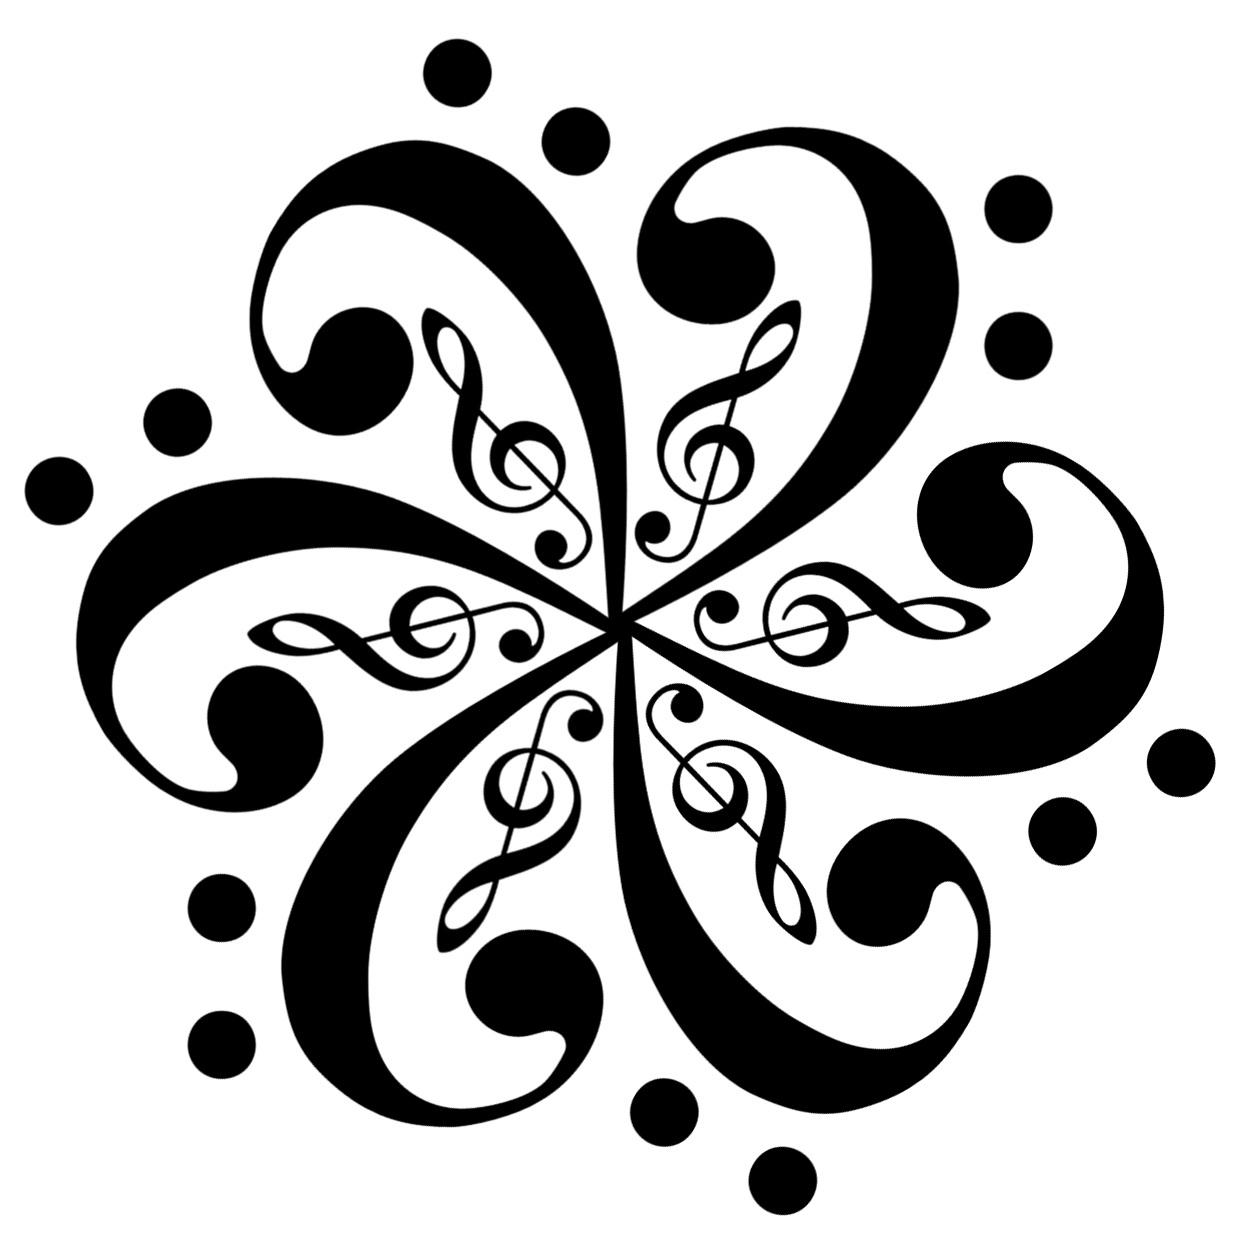 Music note coloring page - Coloring Pages & Pictures - IMAGIXS